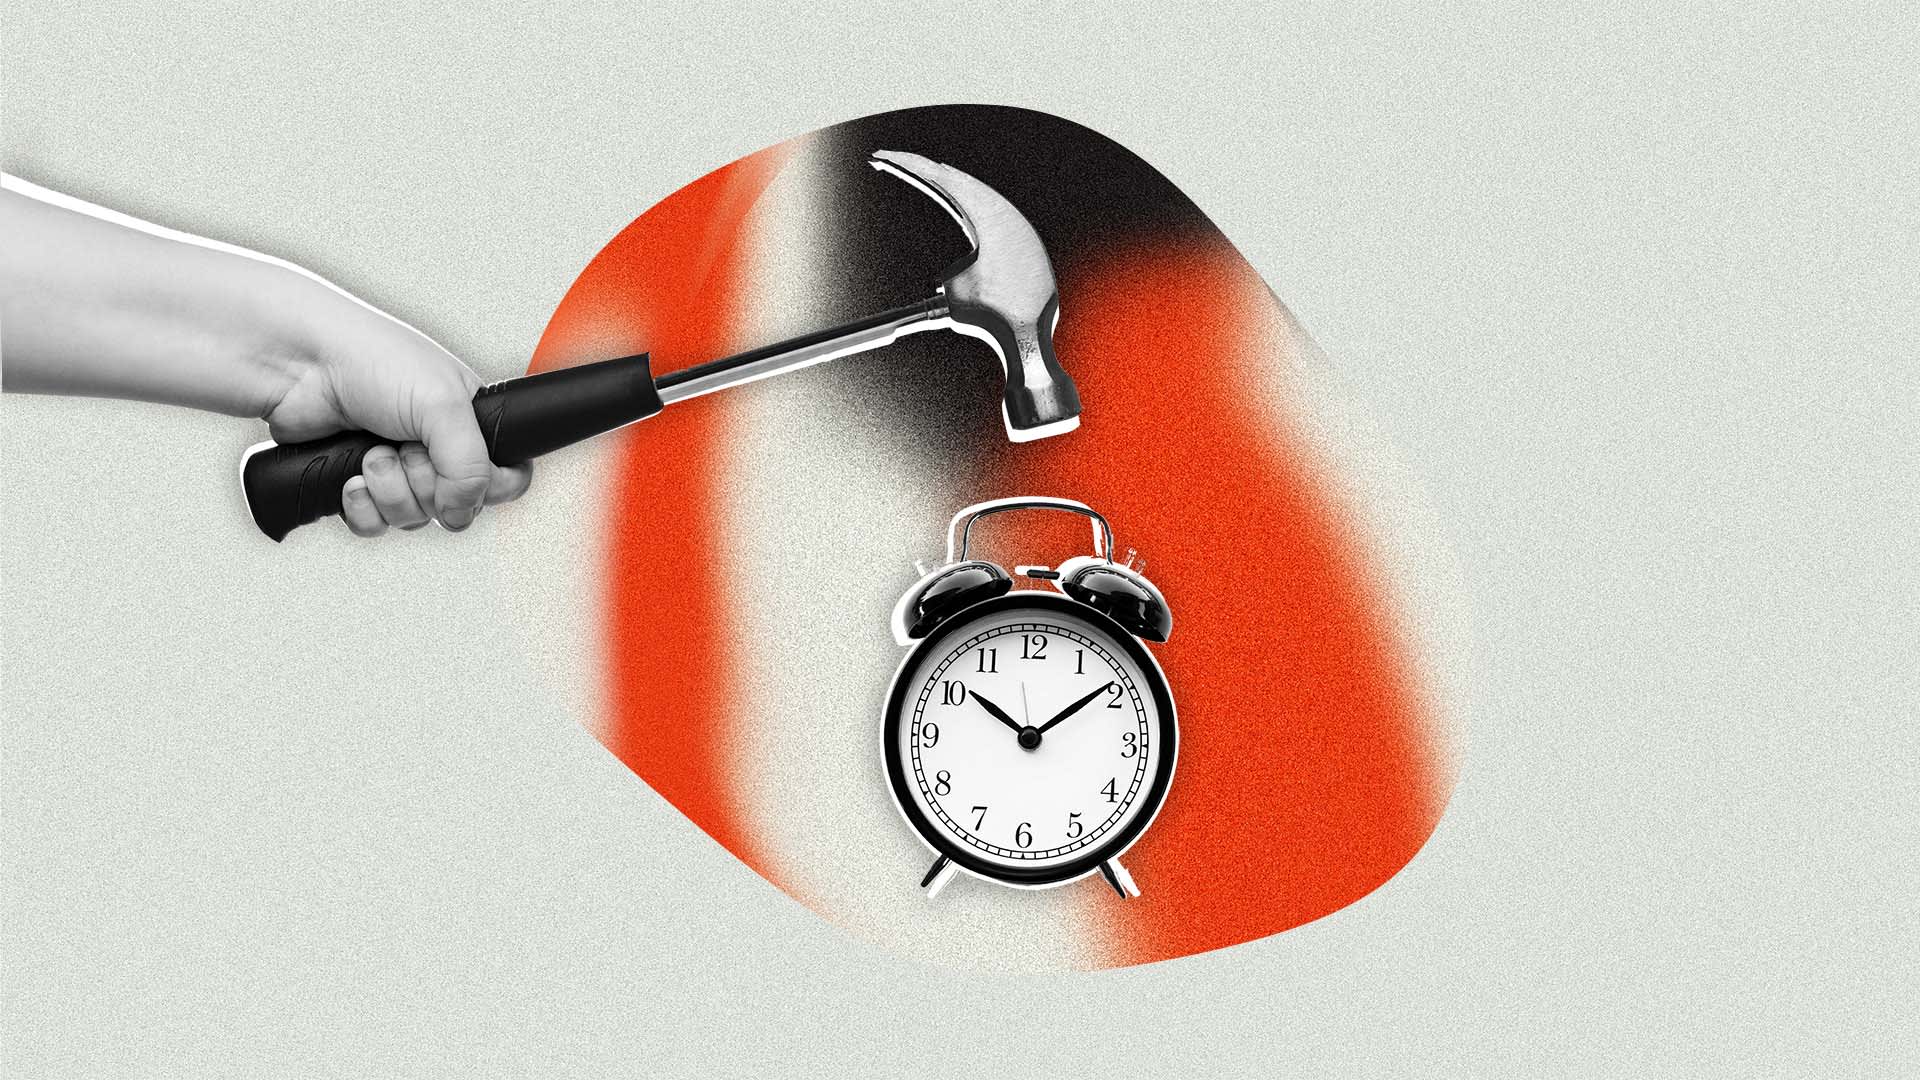 Want to Be More Focused, Productive, and Successful? Science Says Stop Worrying About Deadlines